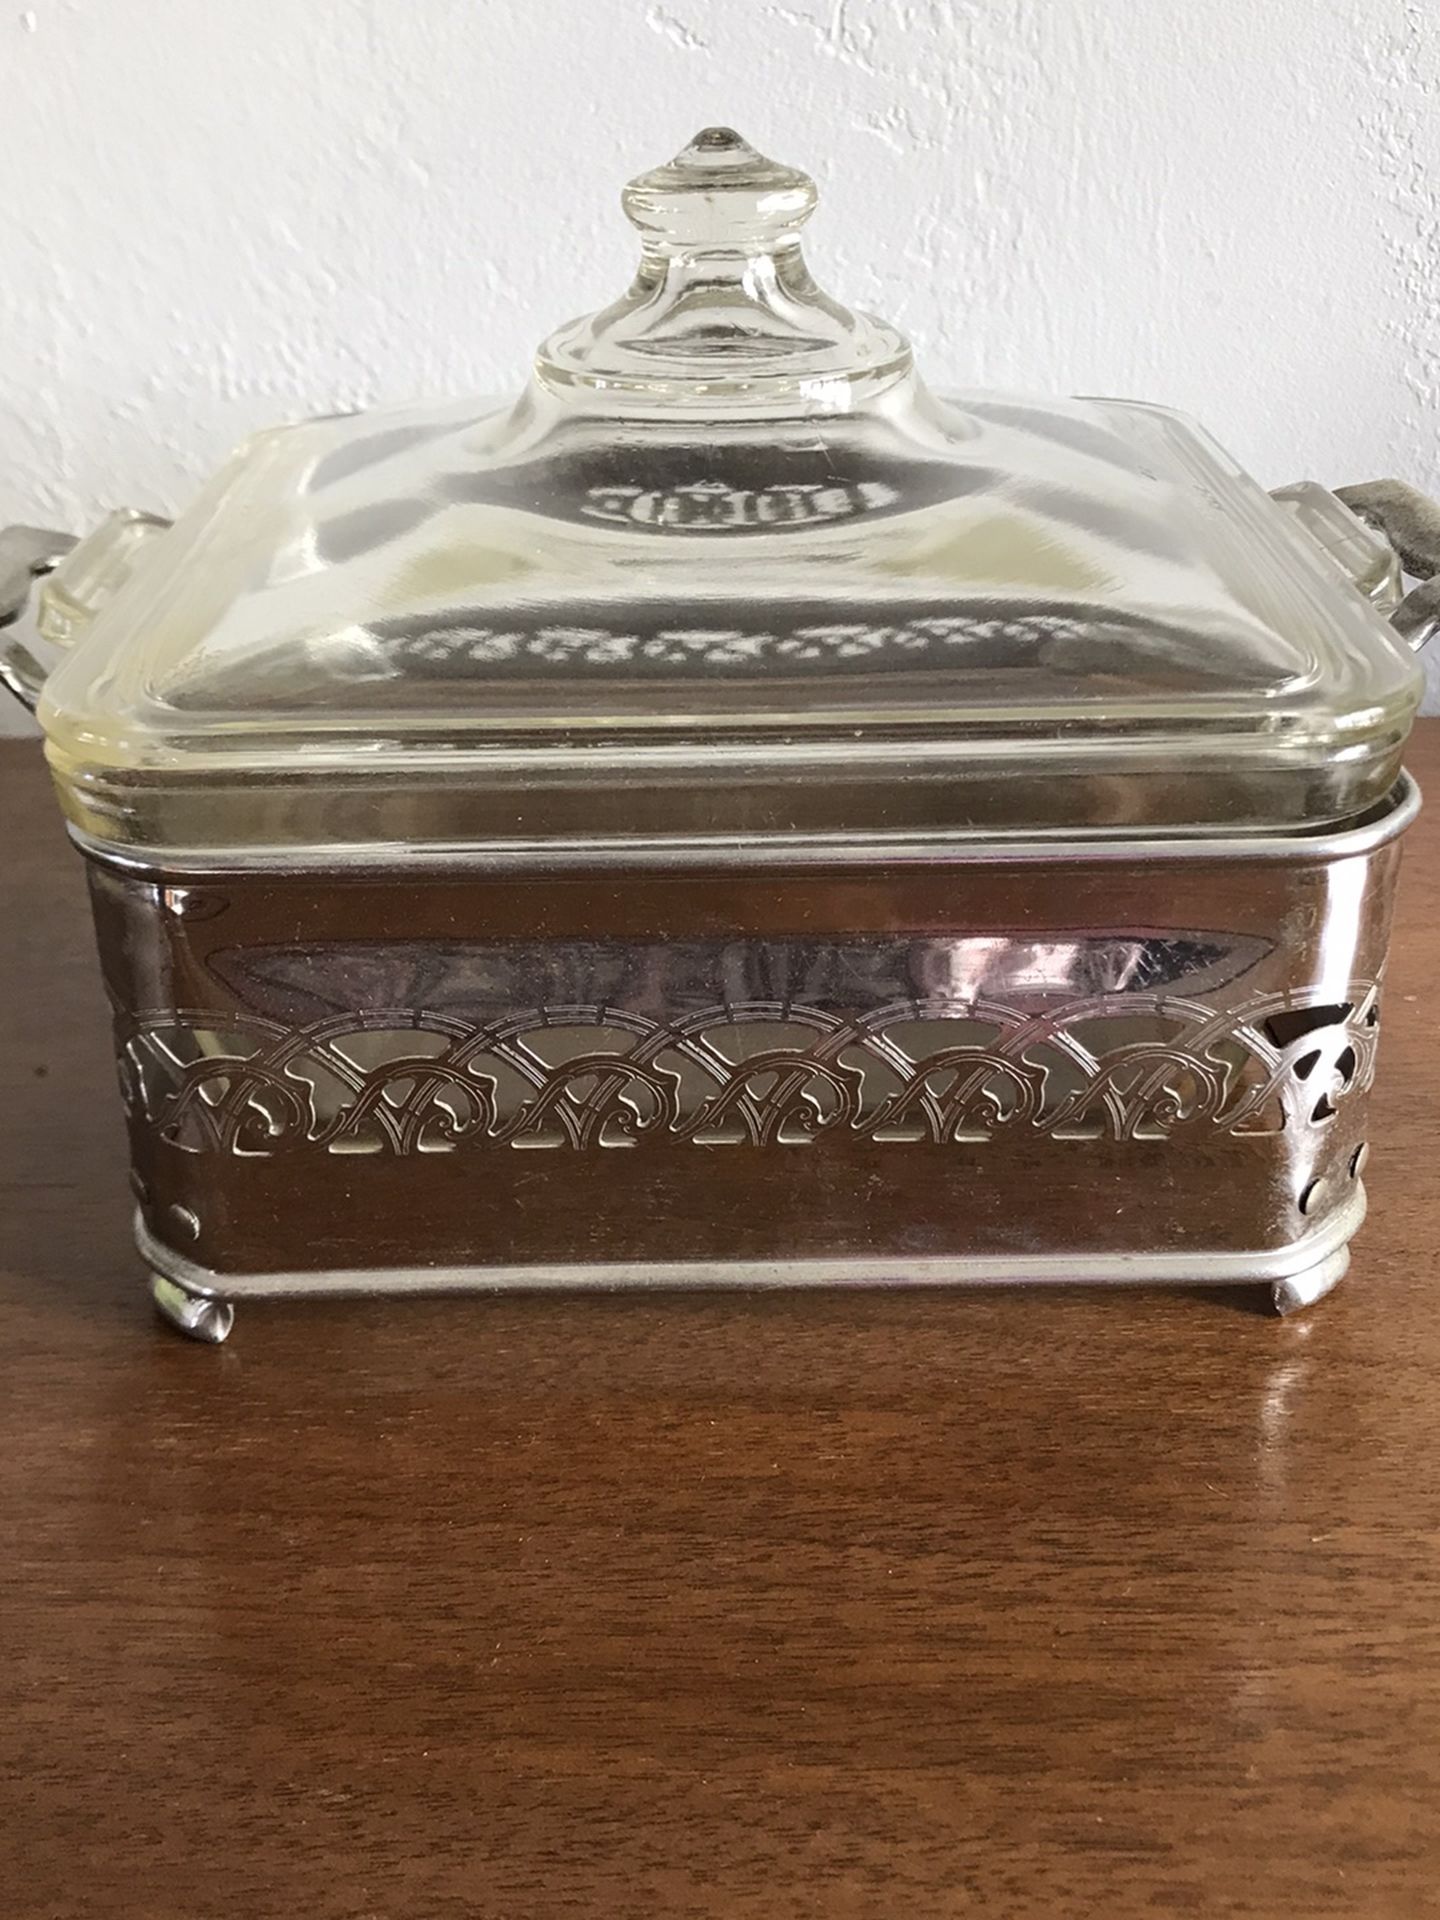 Pyrex with Cradle